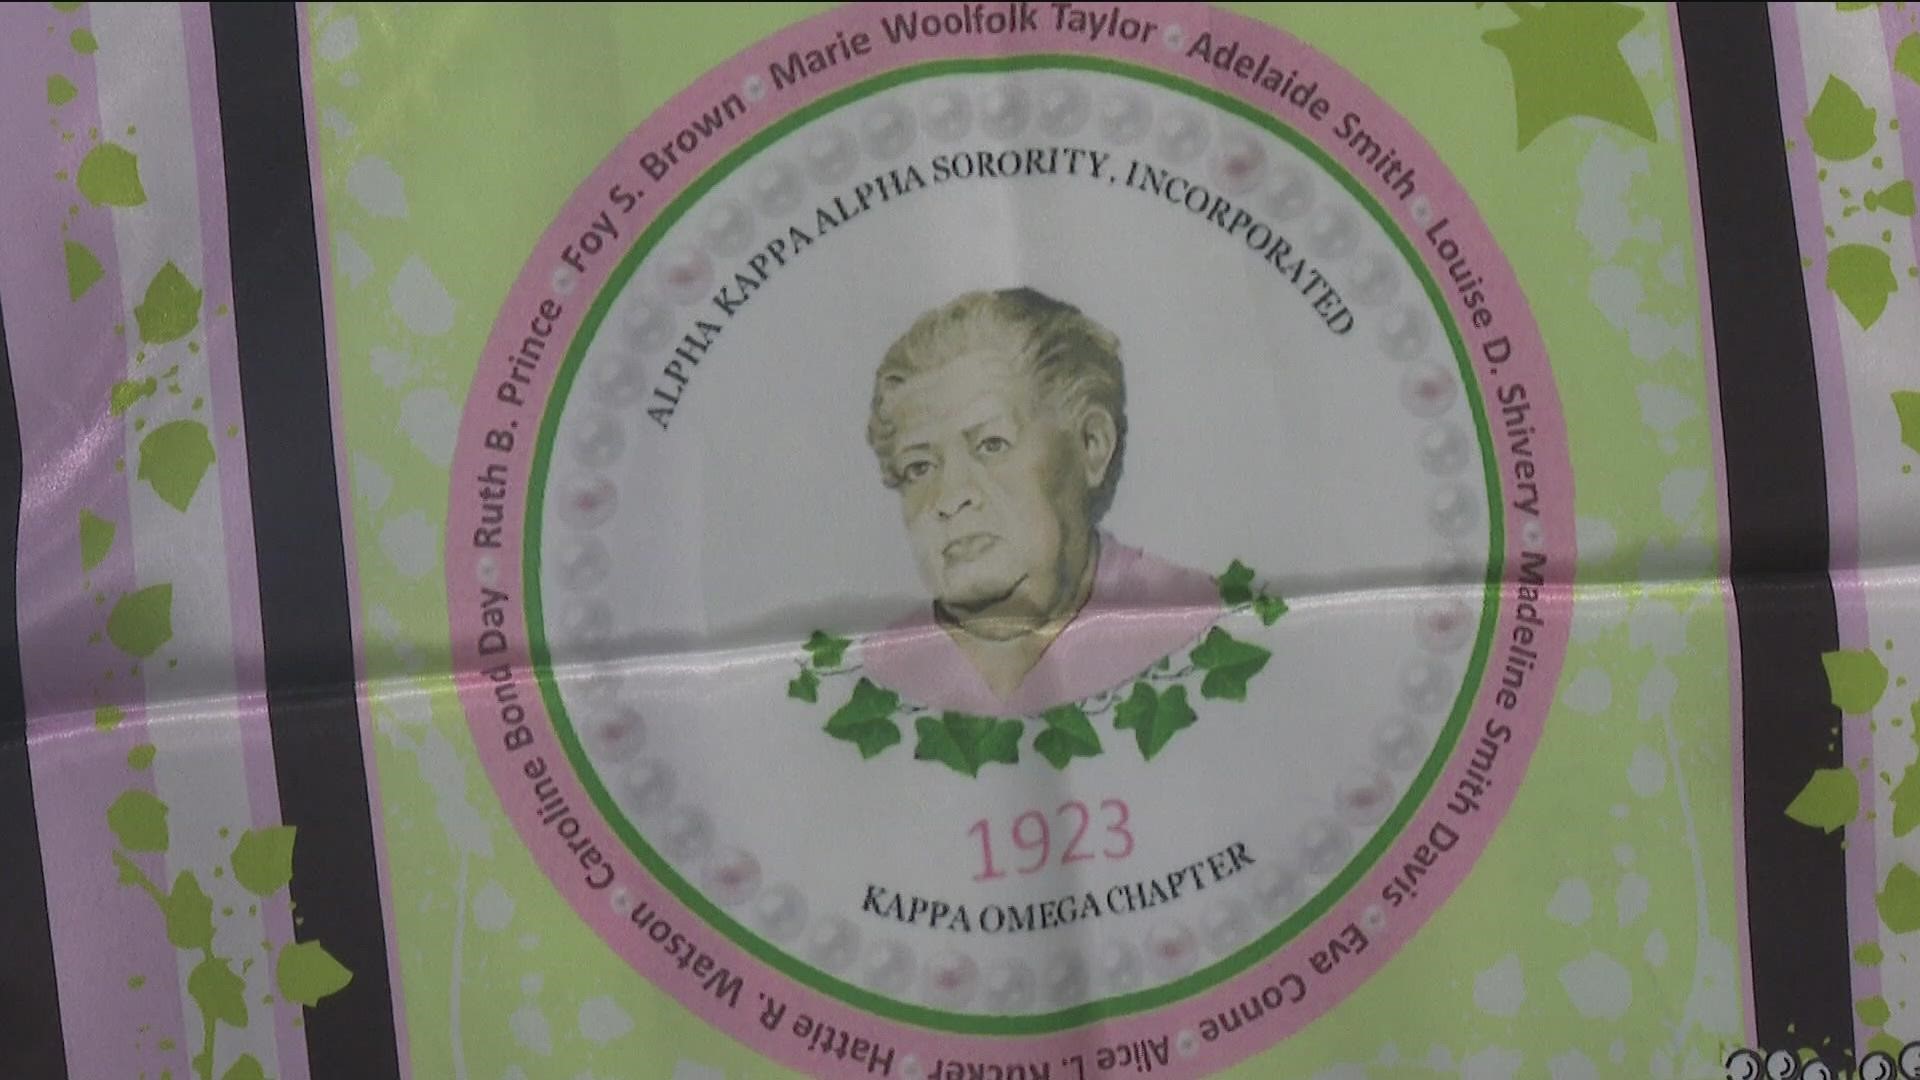 The Kappa Omega Chapter was founded by one of the founding members of Alpha Kappa Alpha Sorority, Inc.